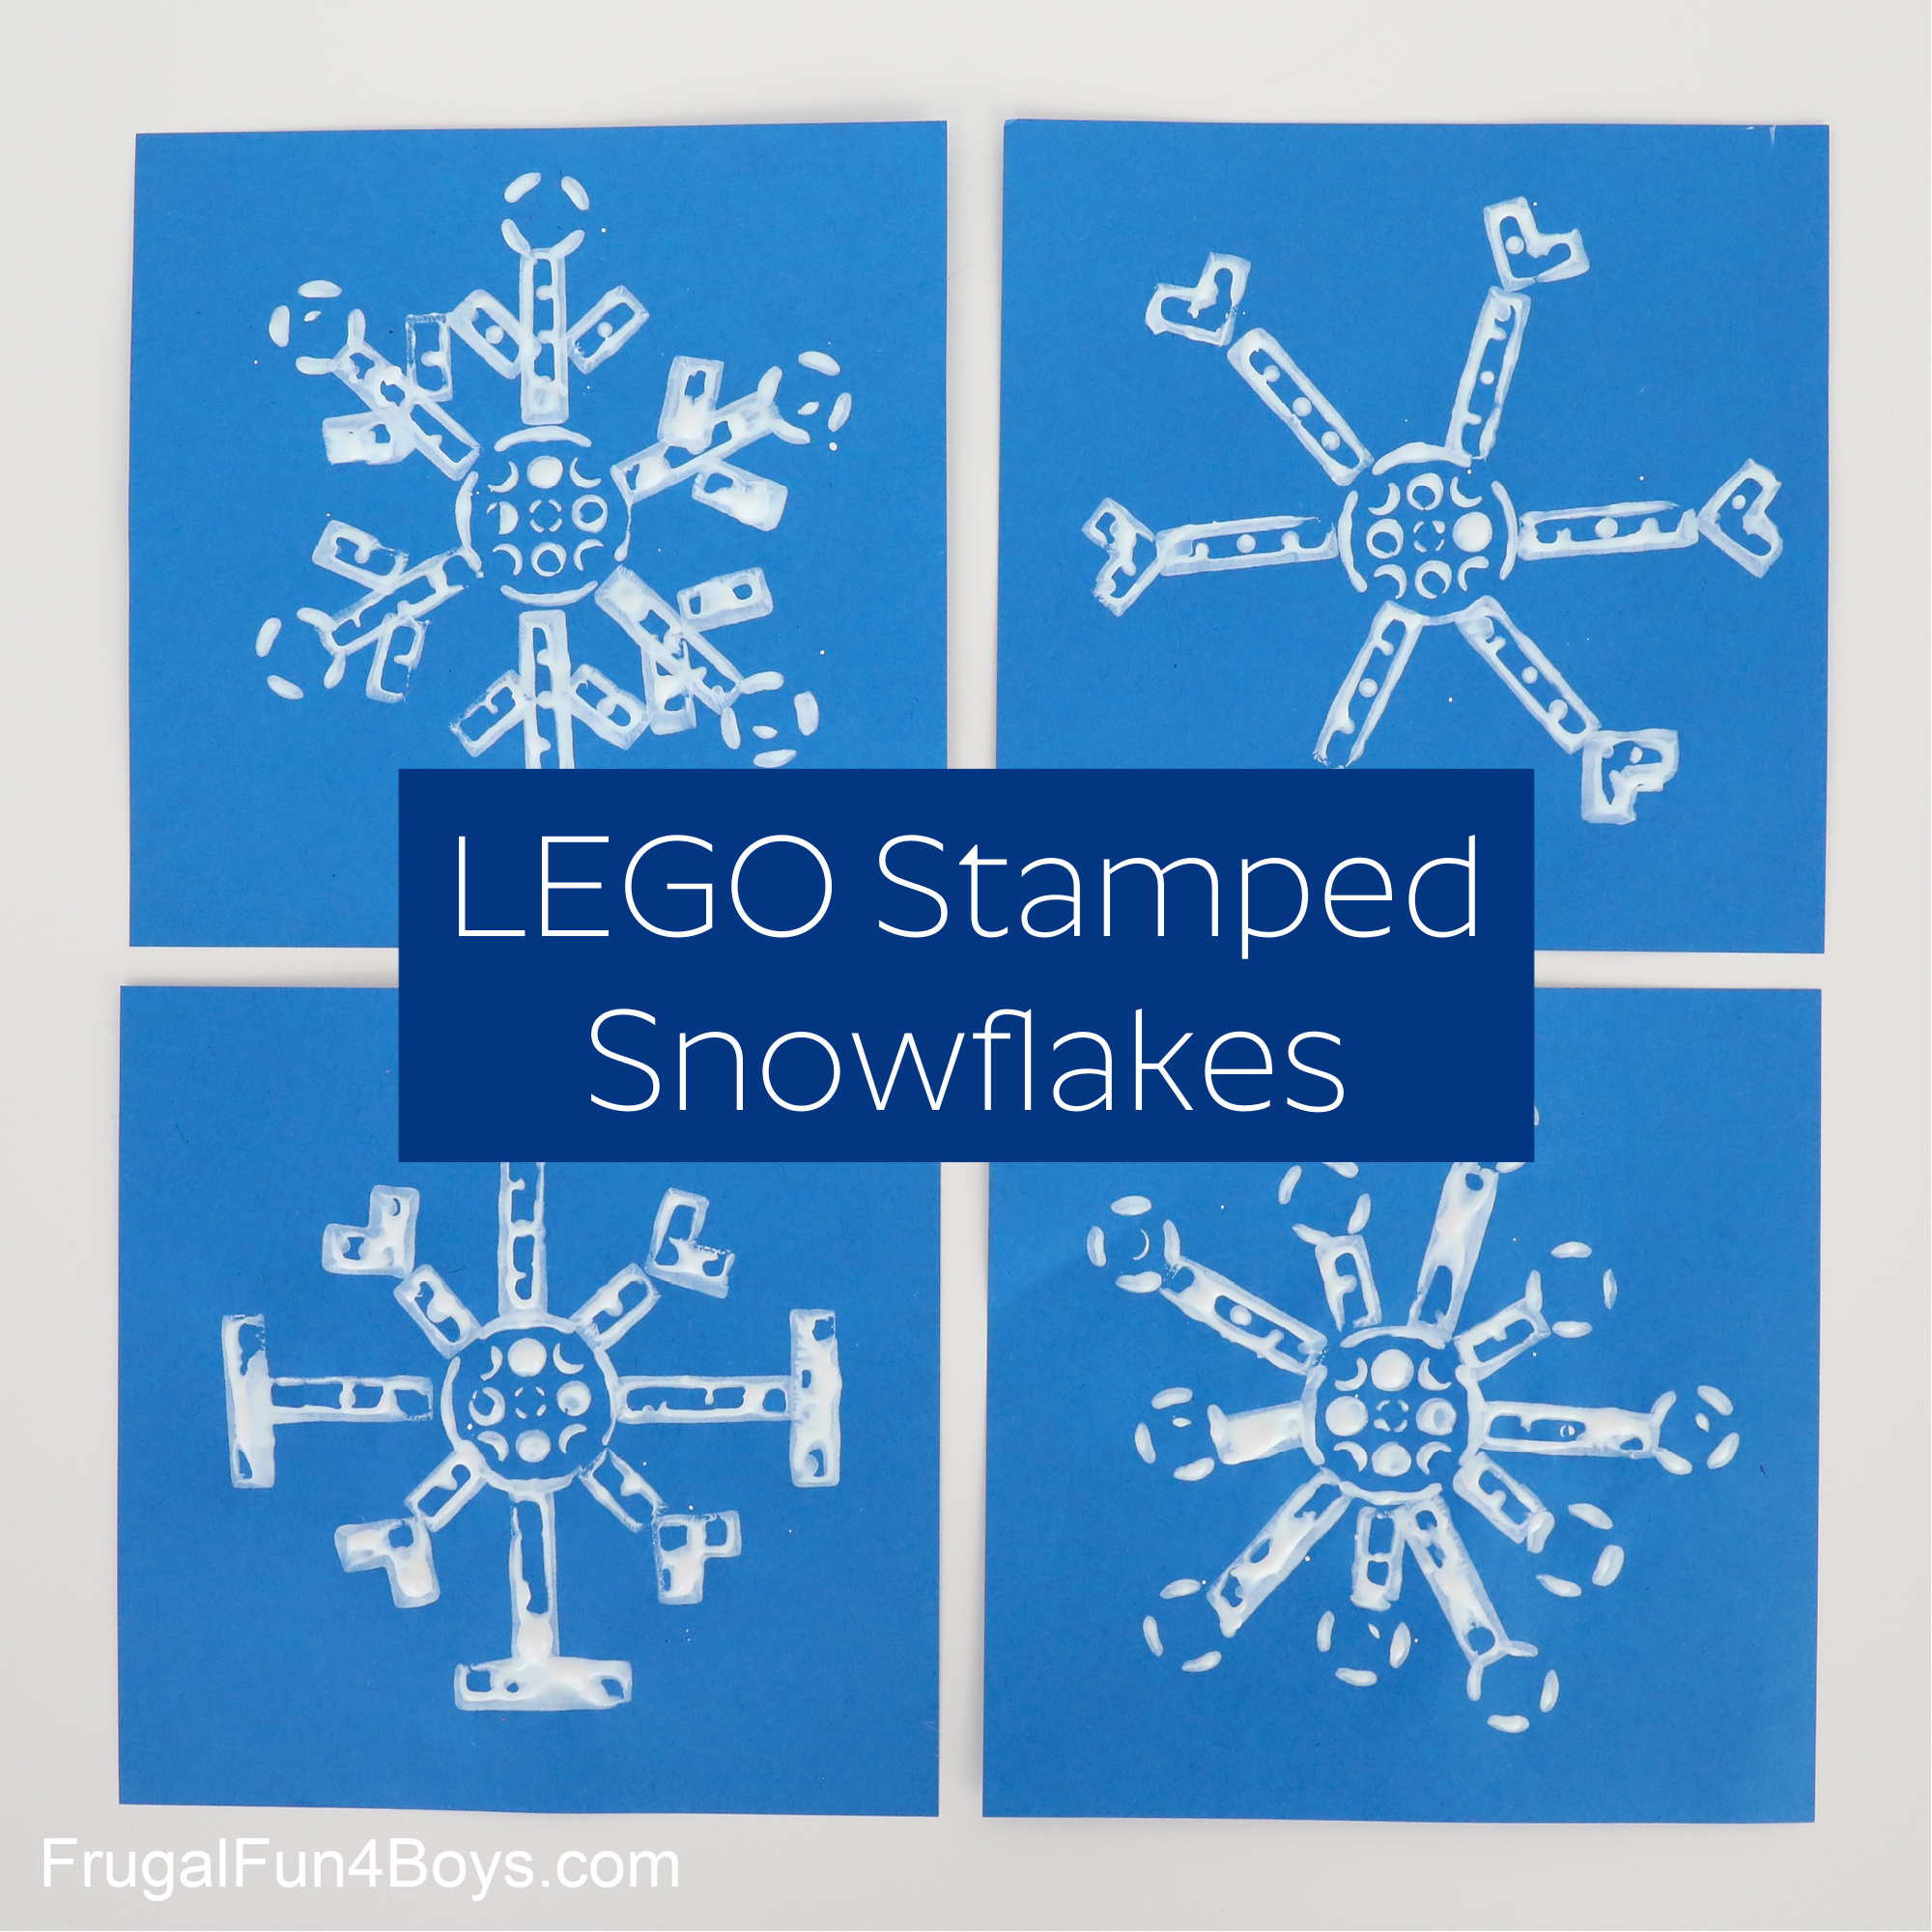 LEGO Stamping Snowflakes - Frugal Fun For Boys and Girls